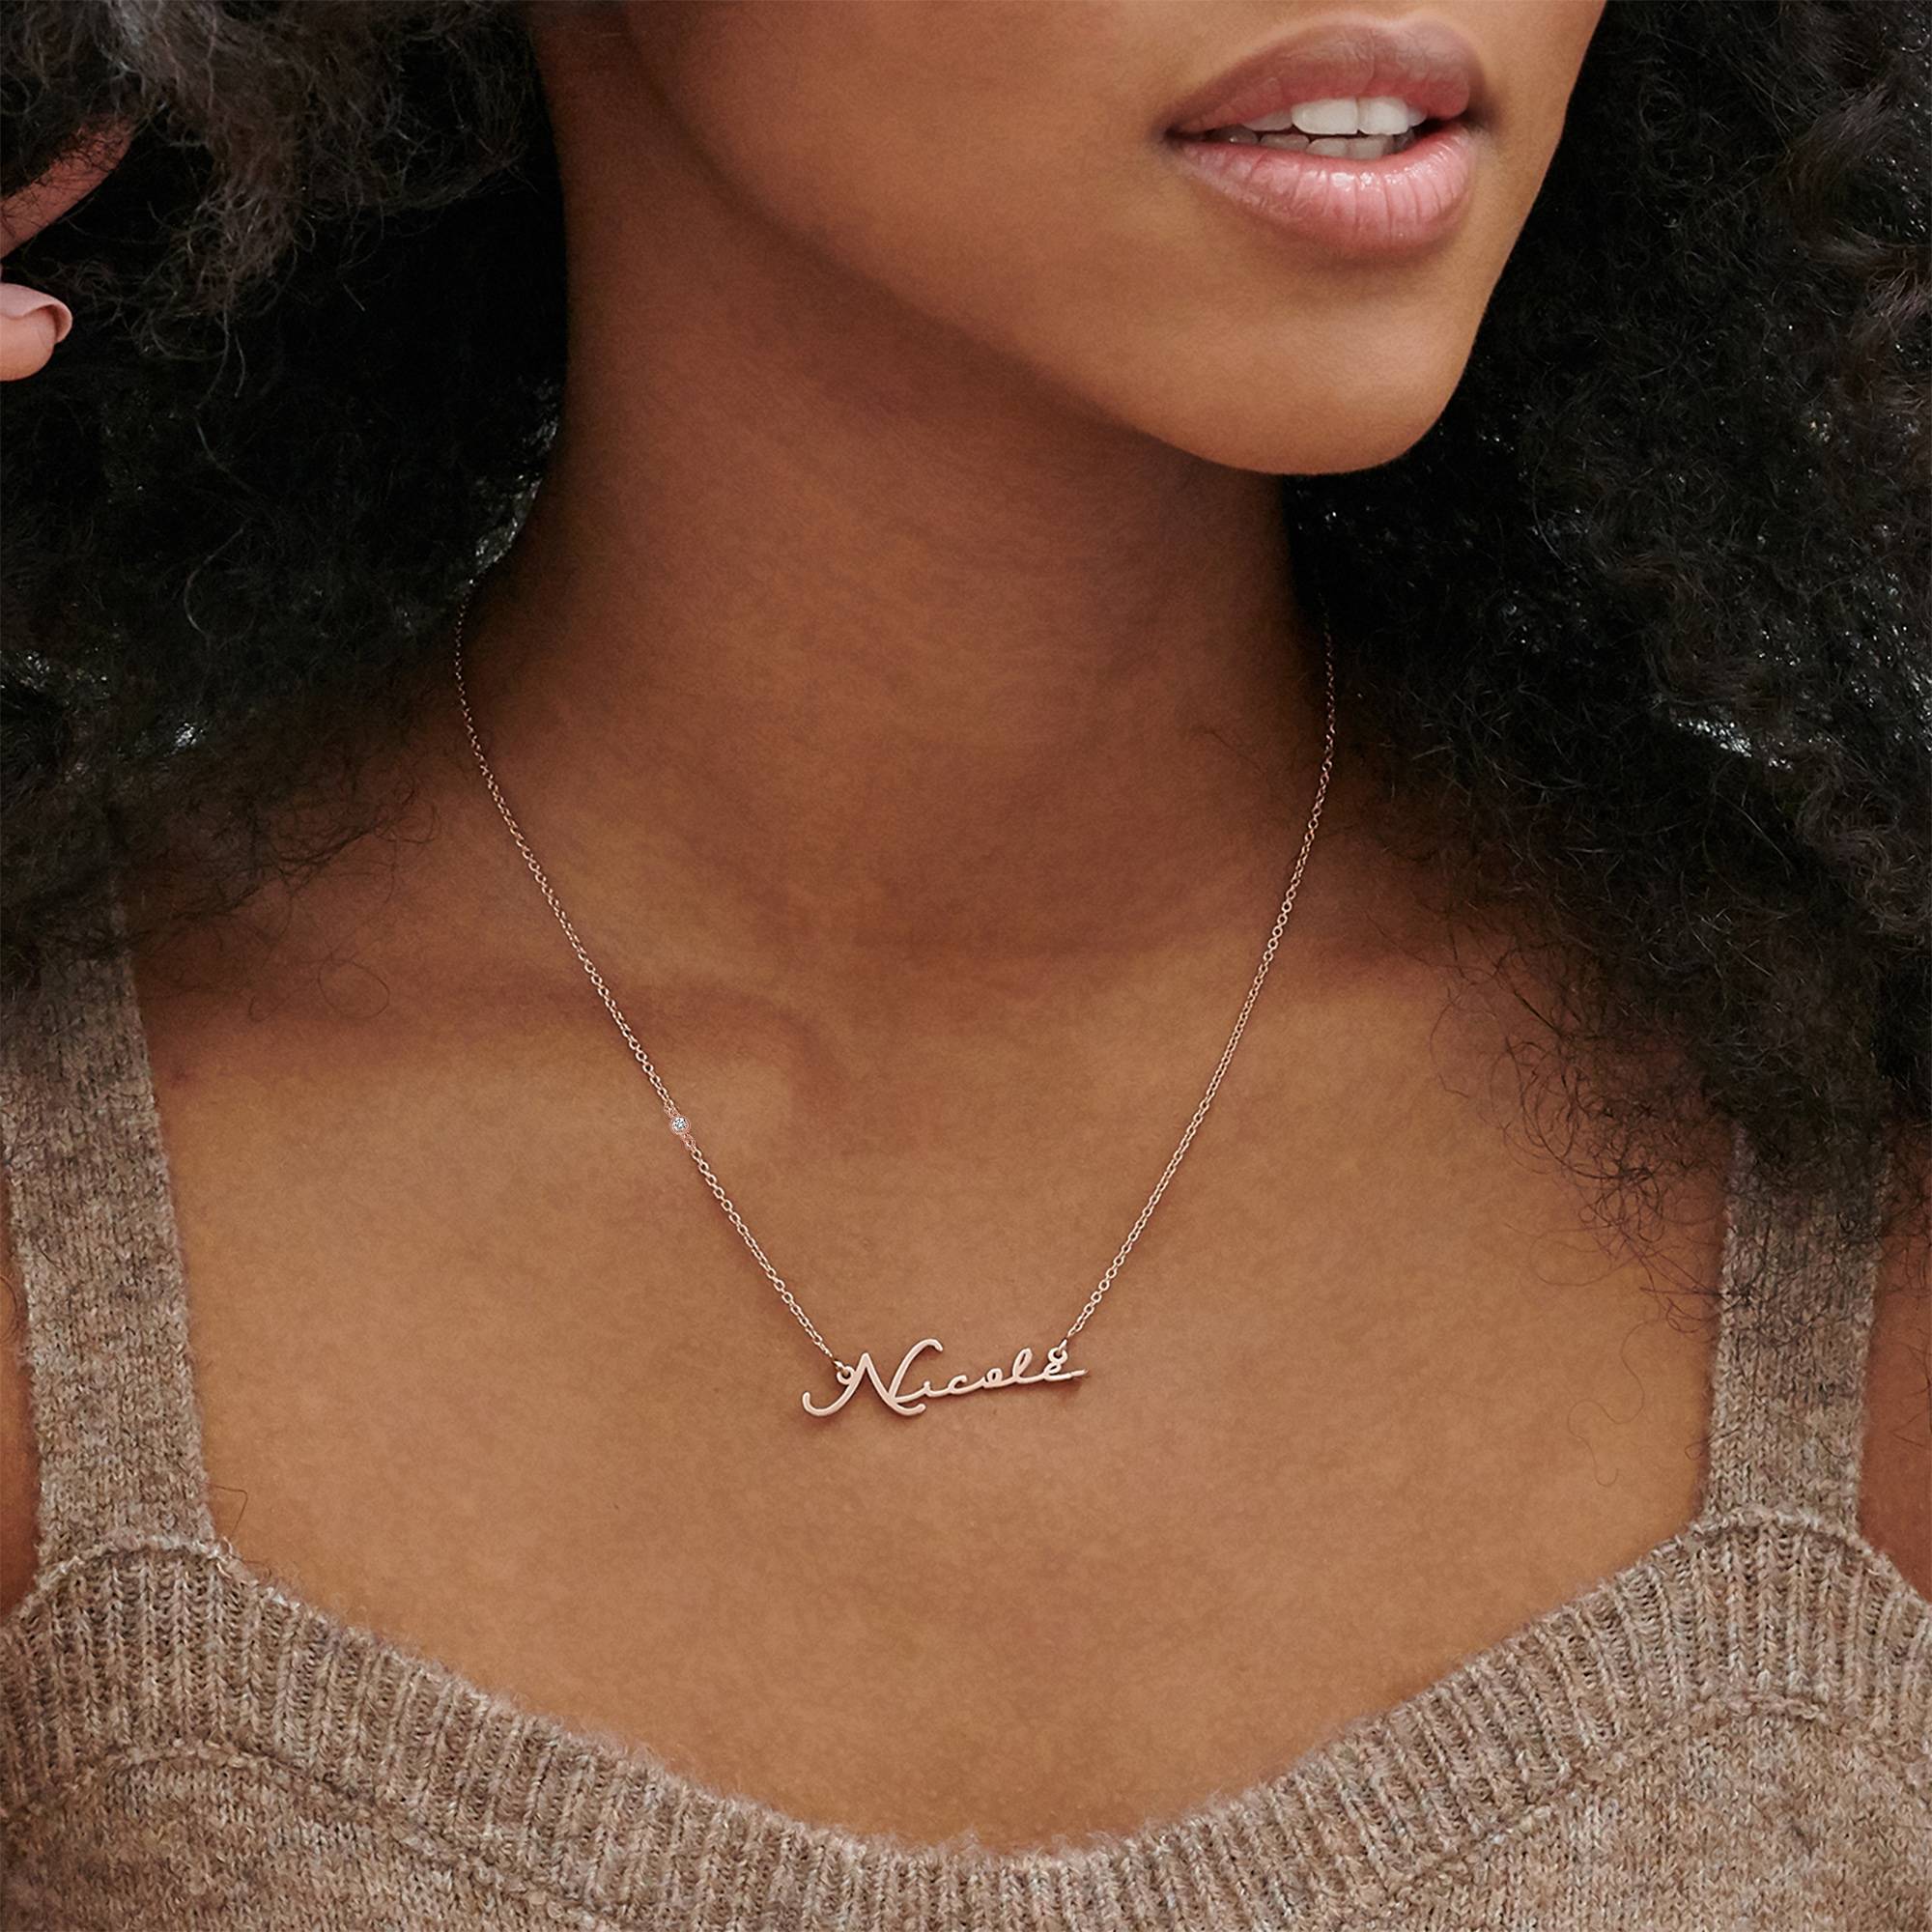 Signature Style Name Necklace in Rose Gold Plating with Diamond-2 product photo